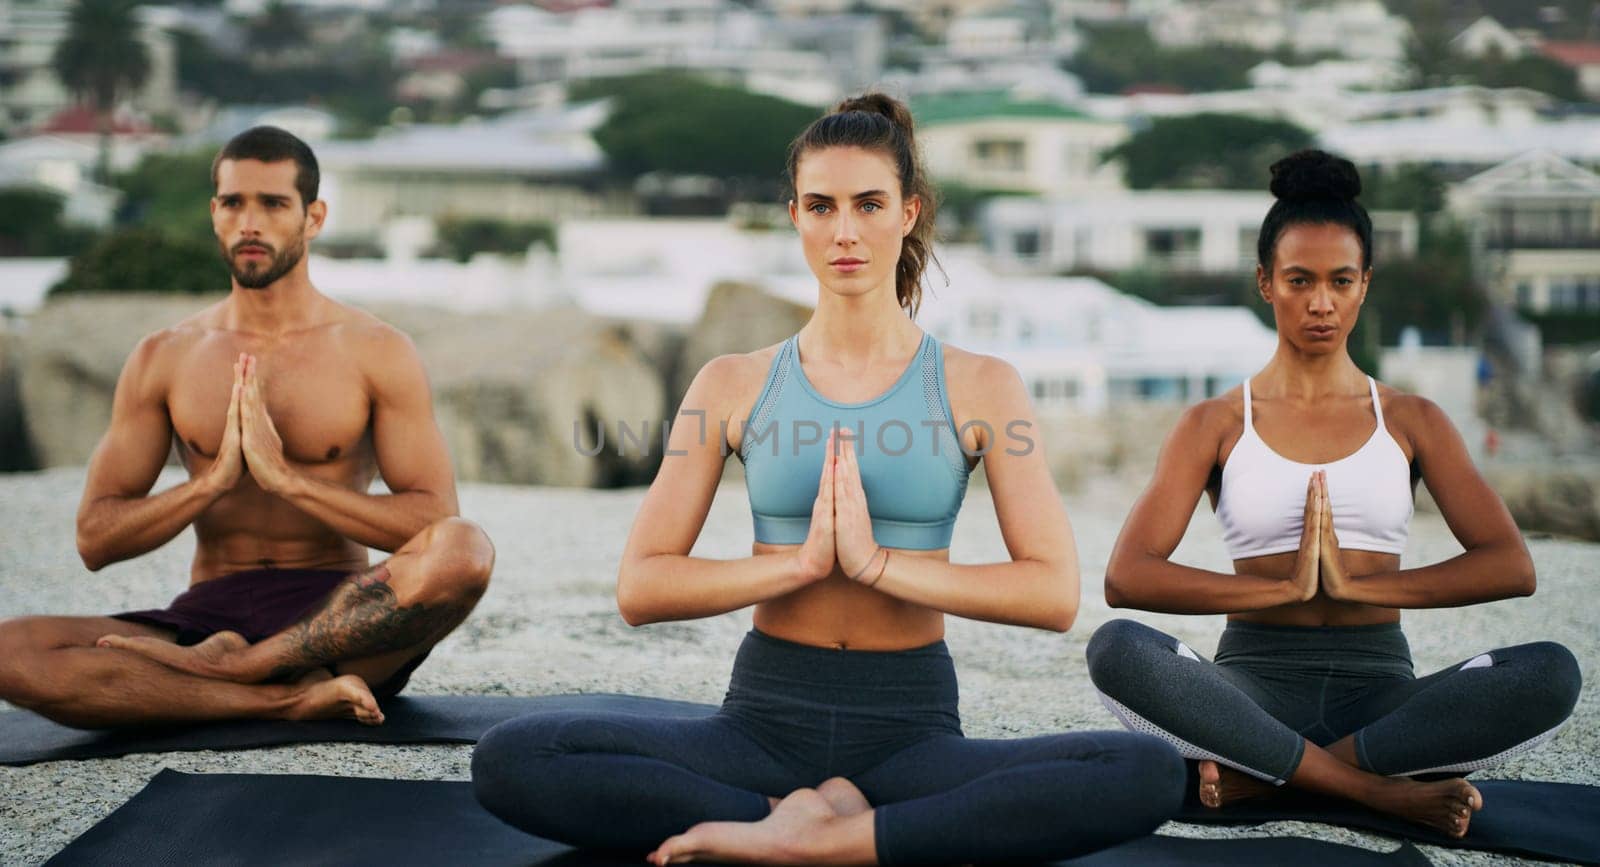 Meditation, group and together outside for yoga, wellness and chakra in sitting and praying hands position for peace. Mindfulness, exercise and zen for spiritual balance, awareness and people relax.